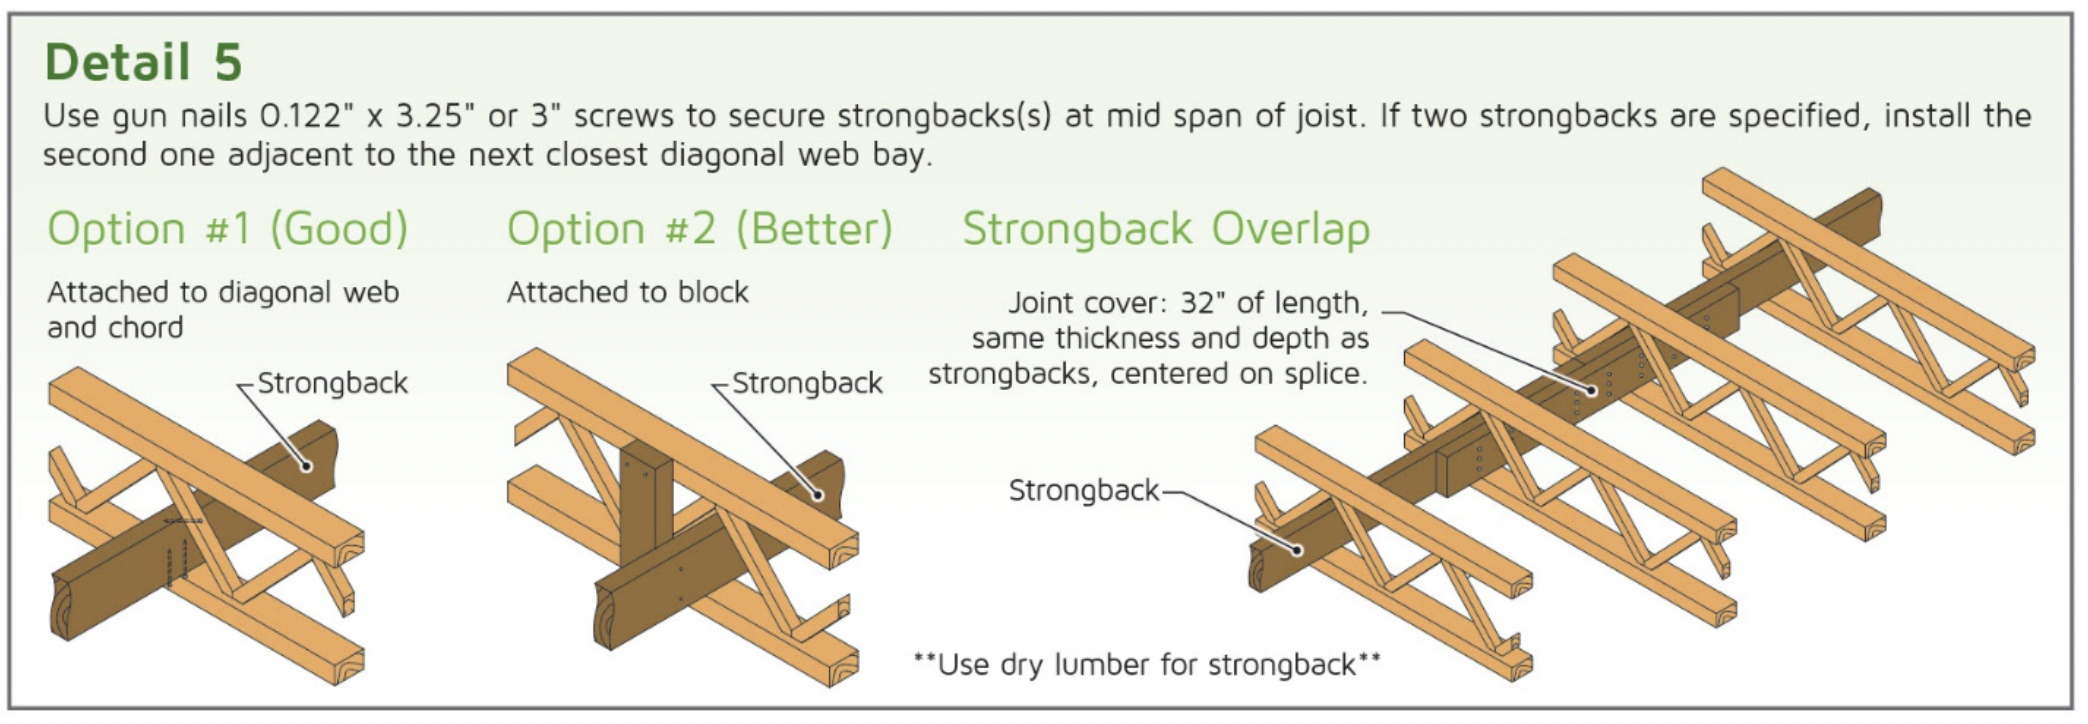 strongback detail 5